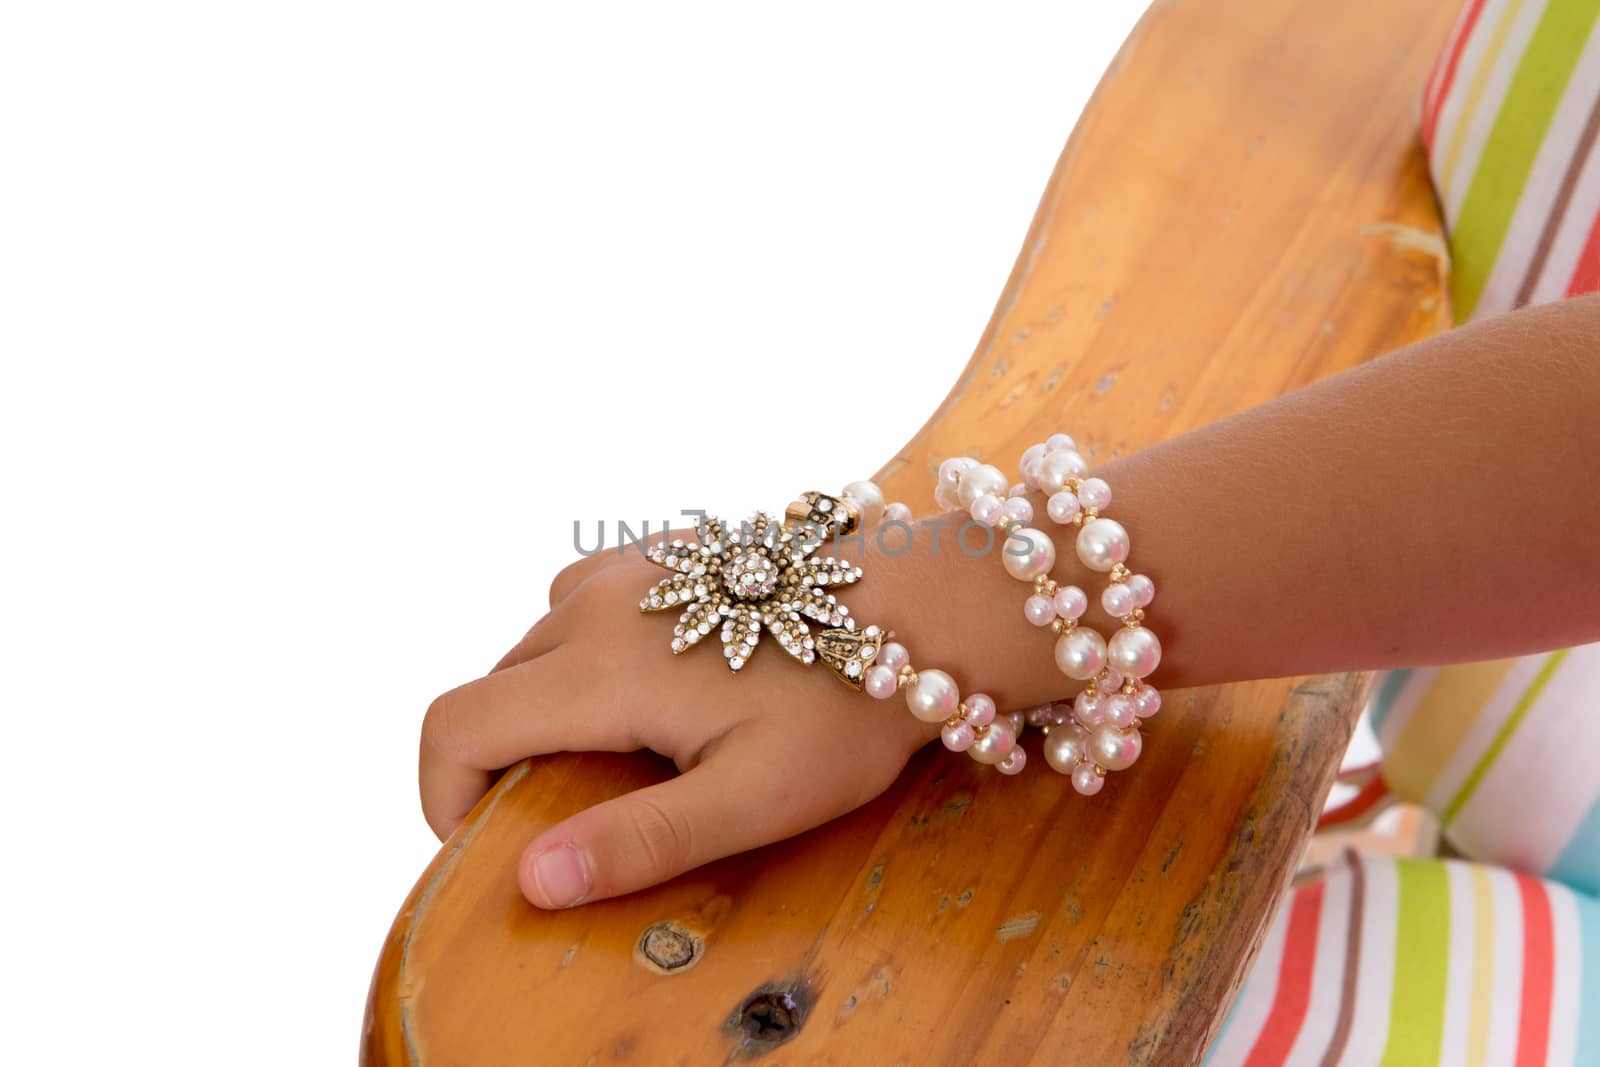 Young girl wearing a pearl and foral bracelet entwined several times around her wrist, close up view of her hand resting on the arm of a wooden chair